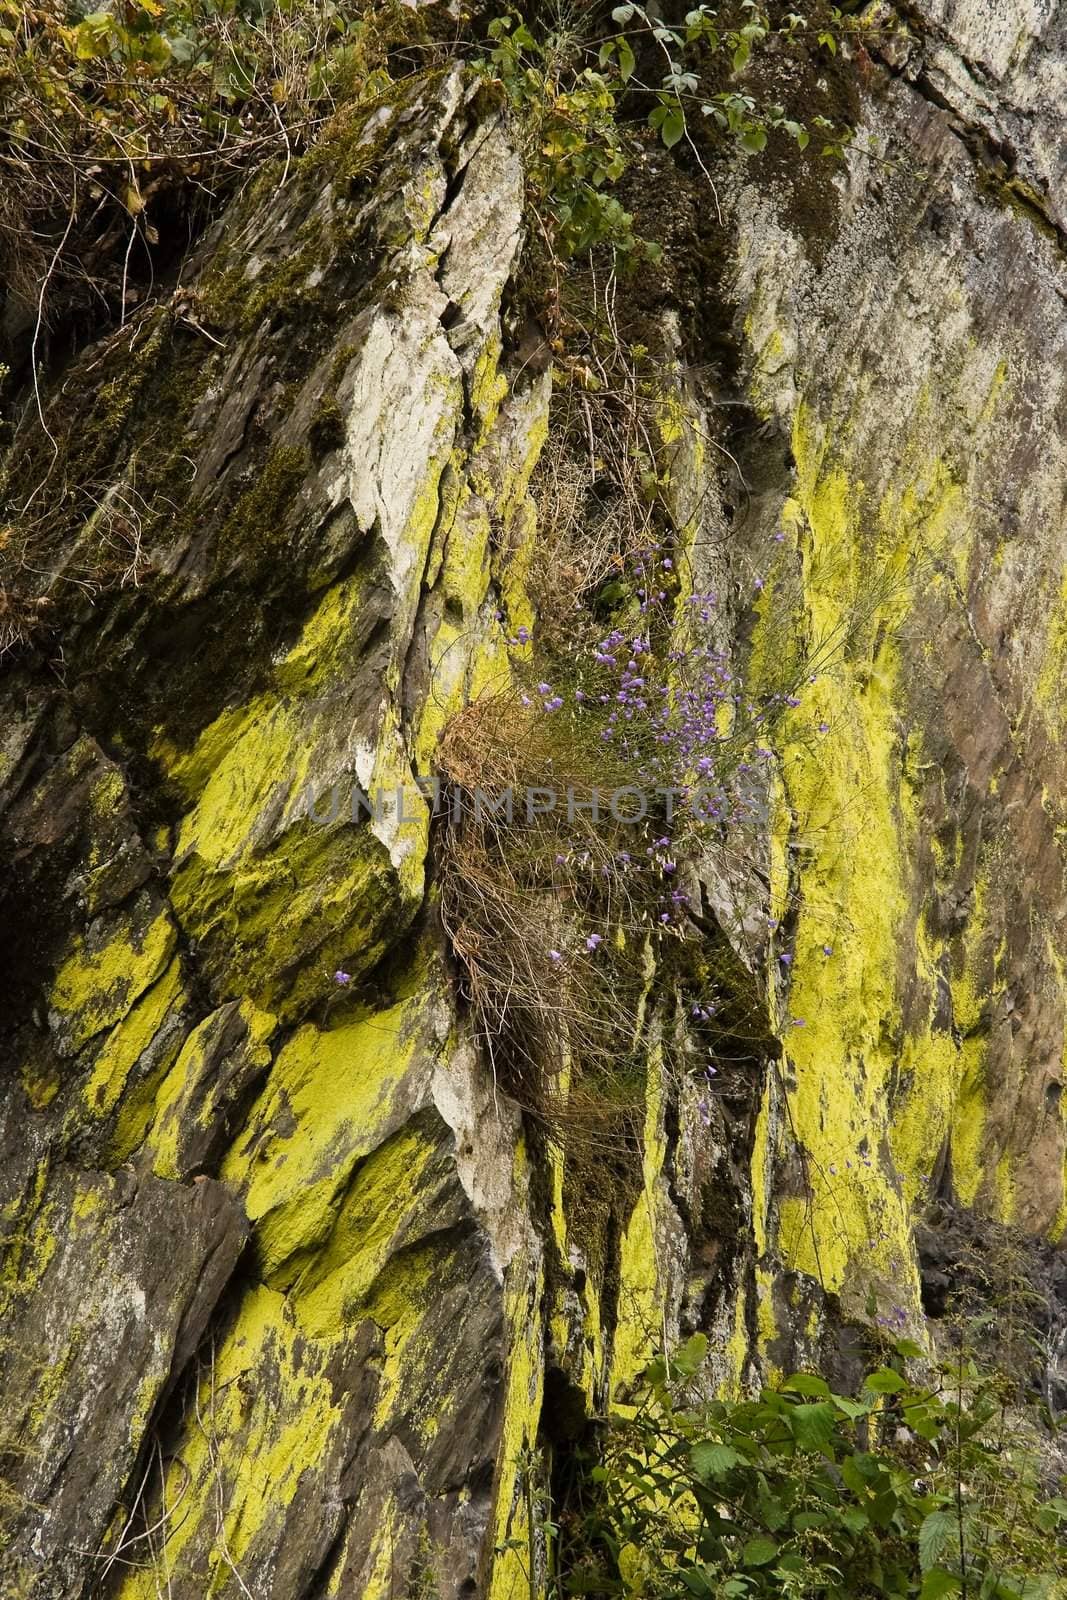 Rockwall overgrown with moss, lychens and bushes-vertical image